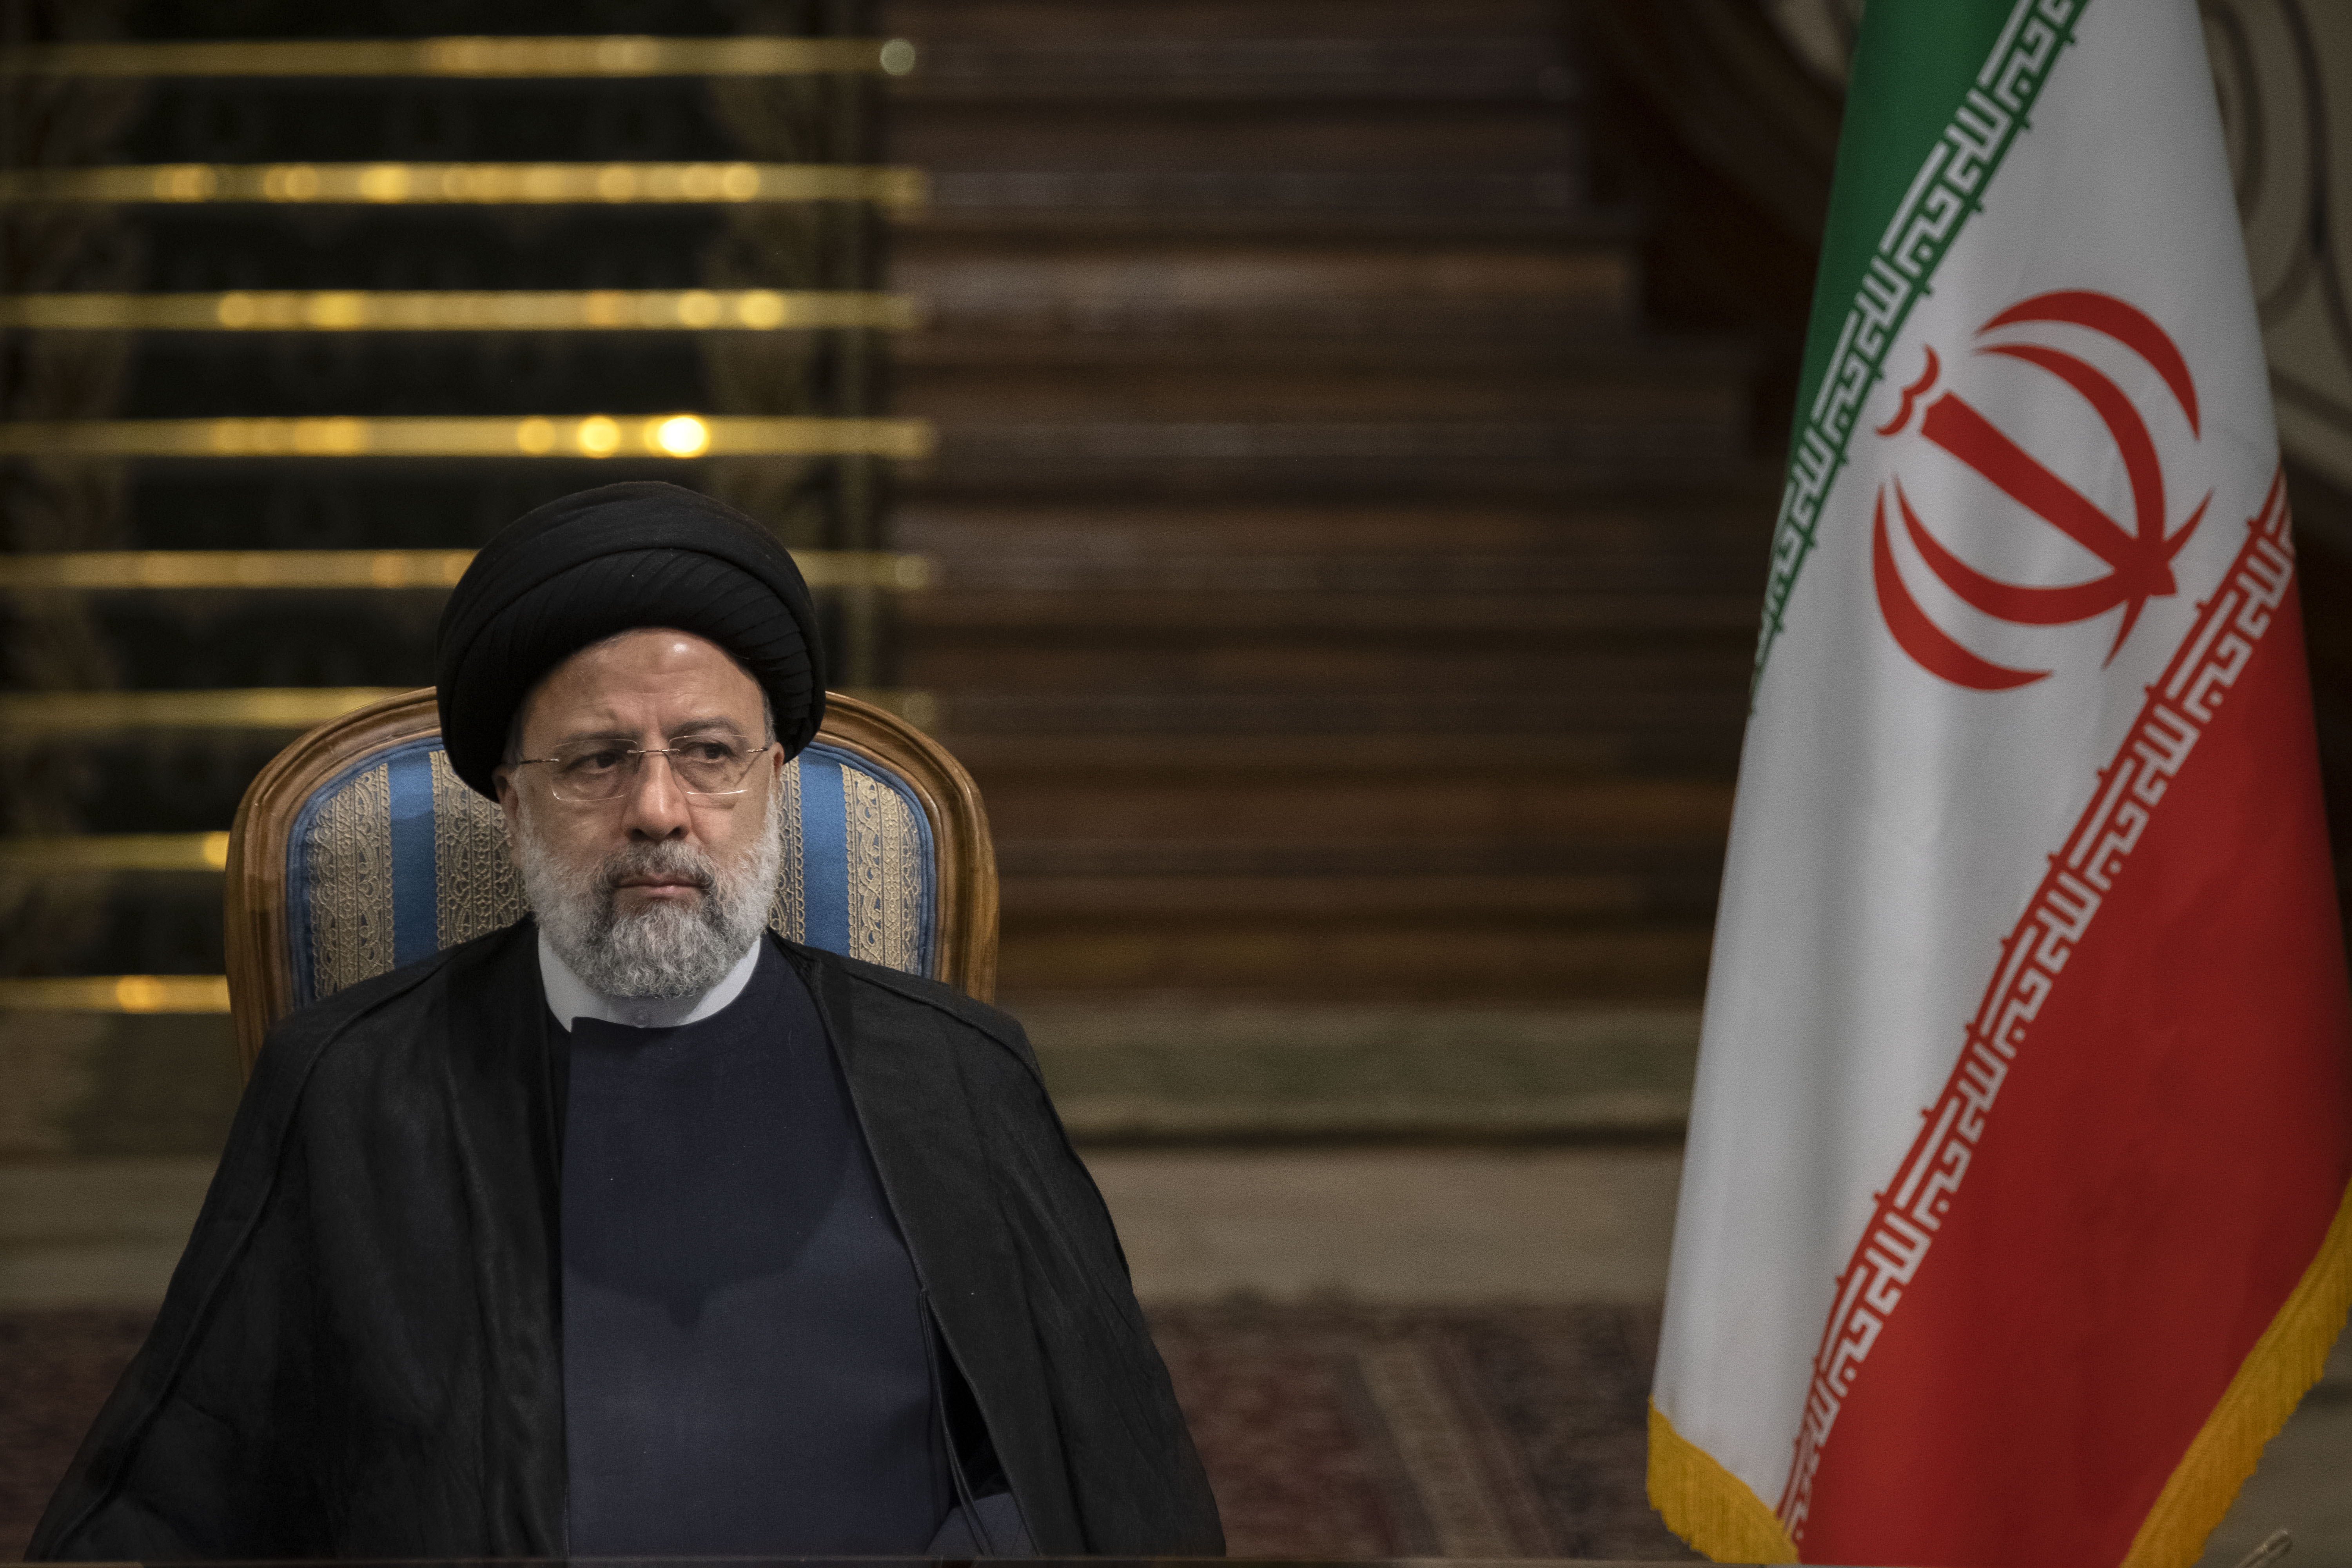 Iranian leader returns to Tehran while FM stays in US to grow diplomatic ties